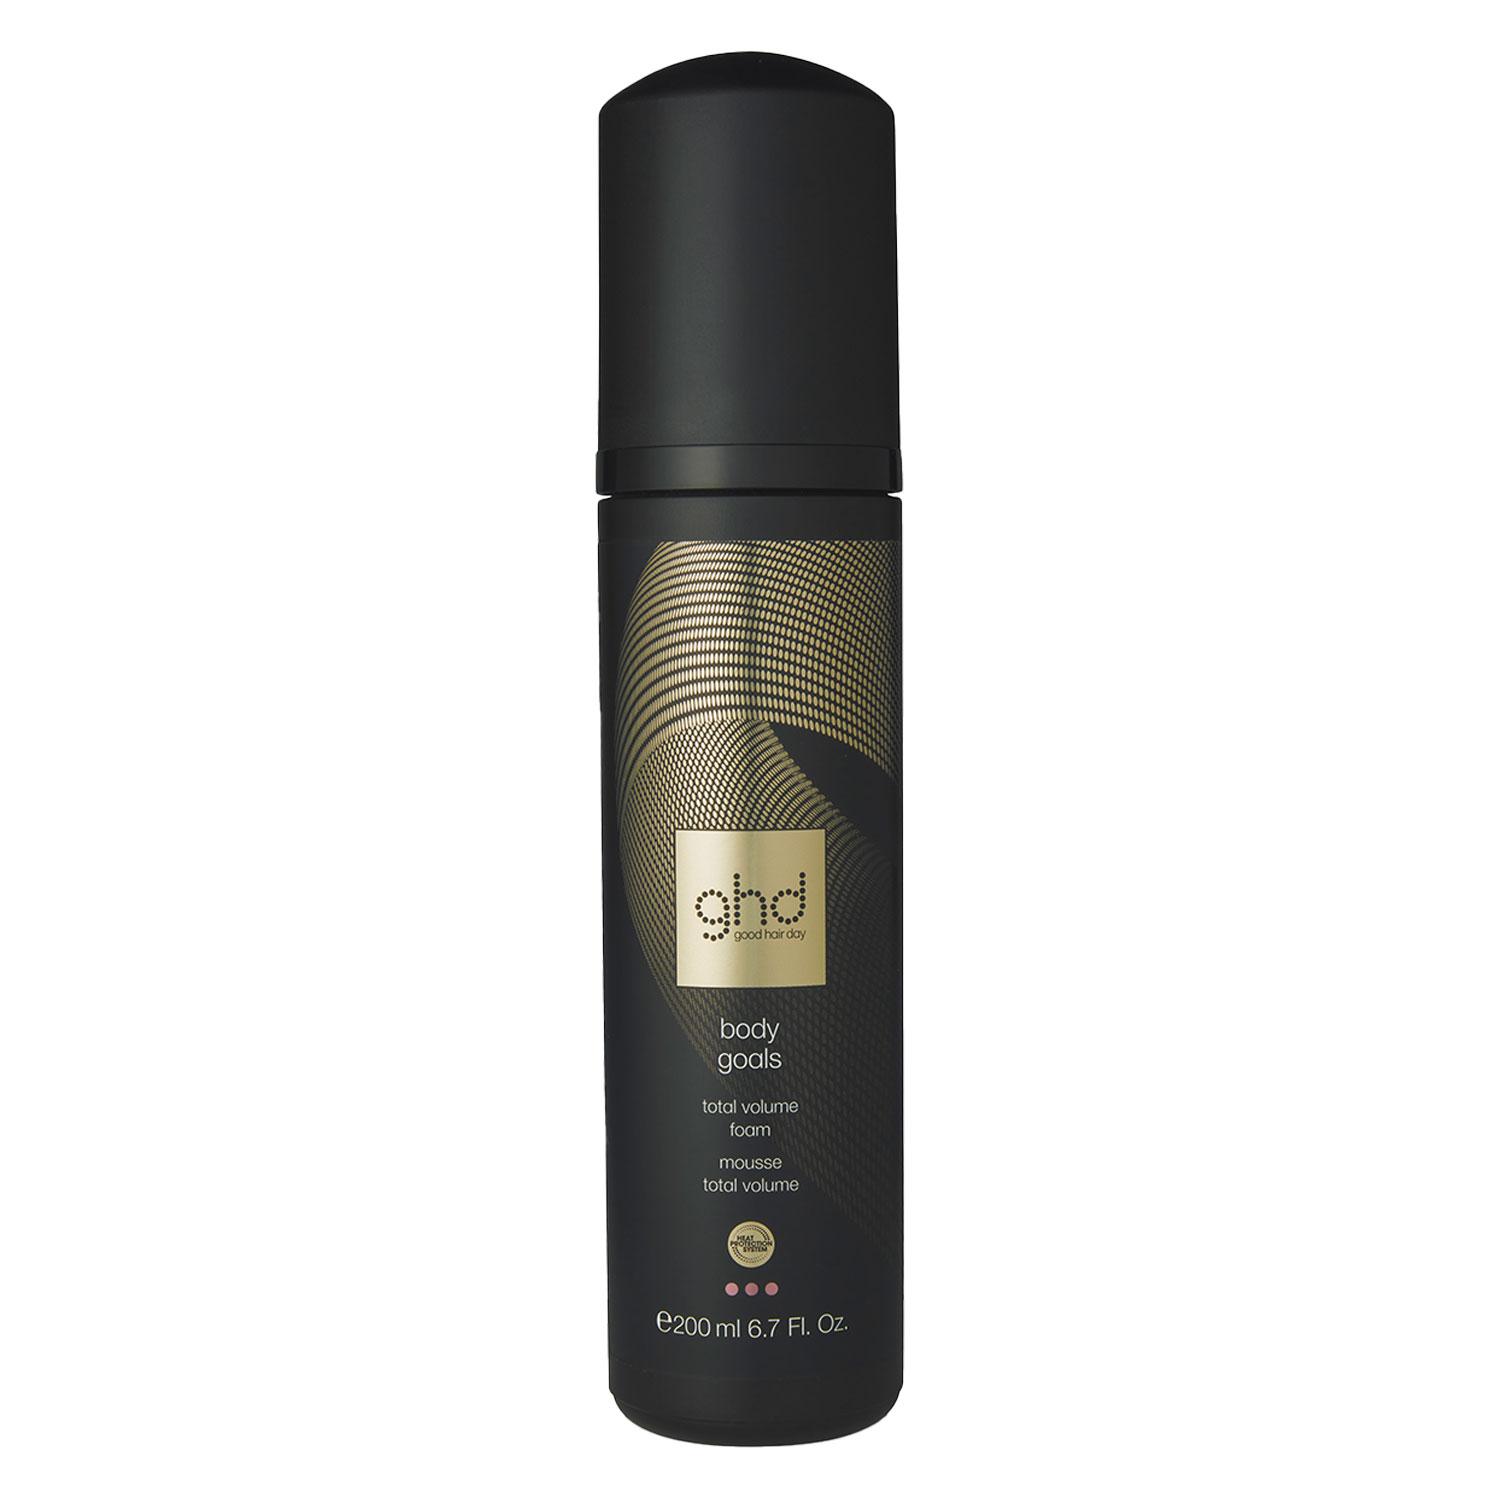 ghd Heat Protection Styling System - Body Goals Total Volume Foam